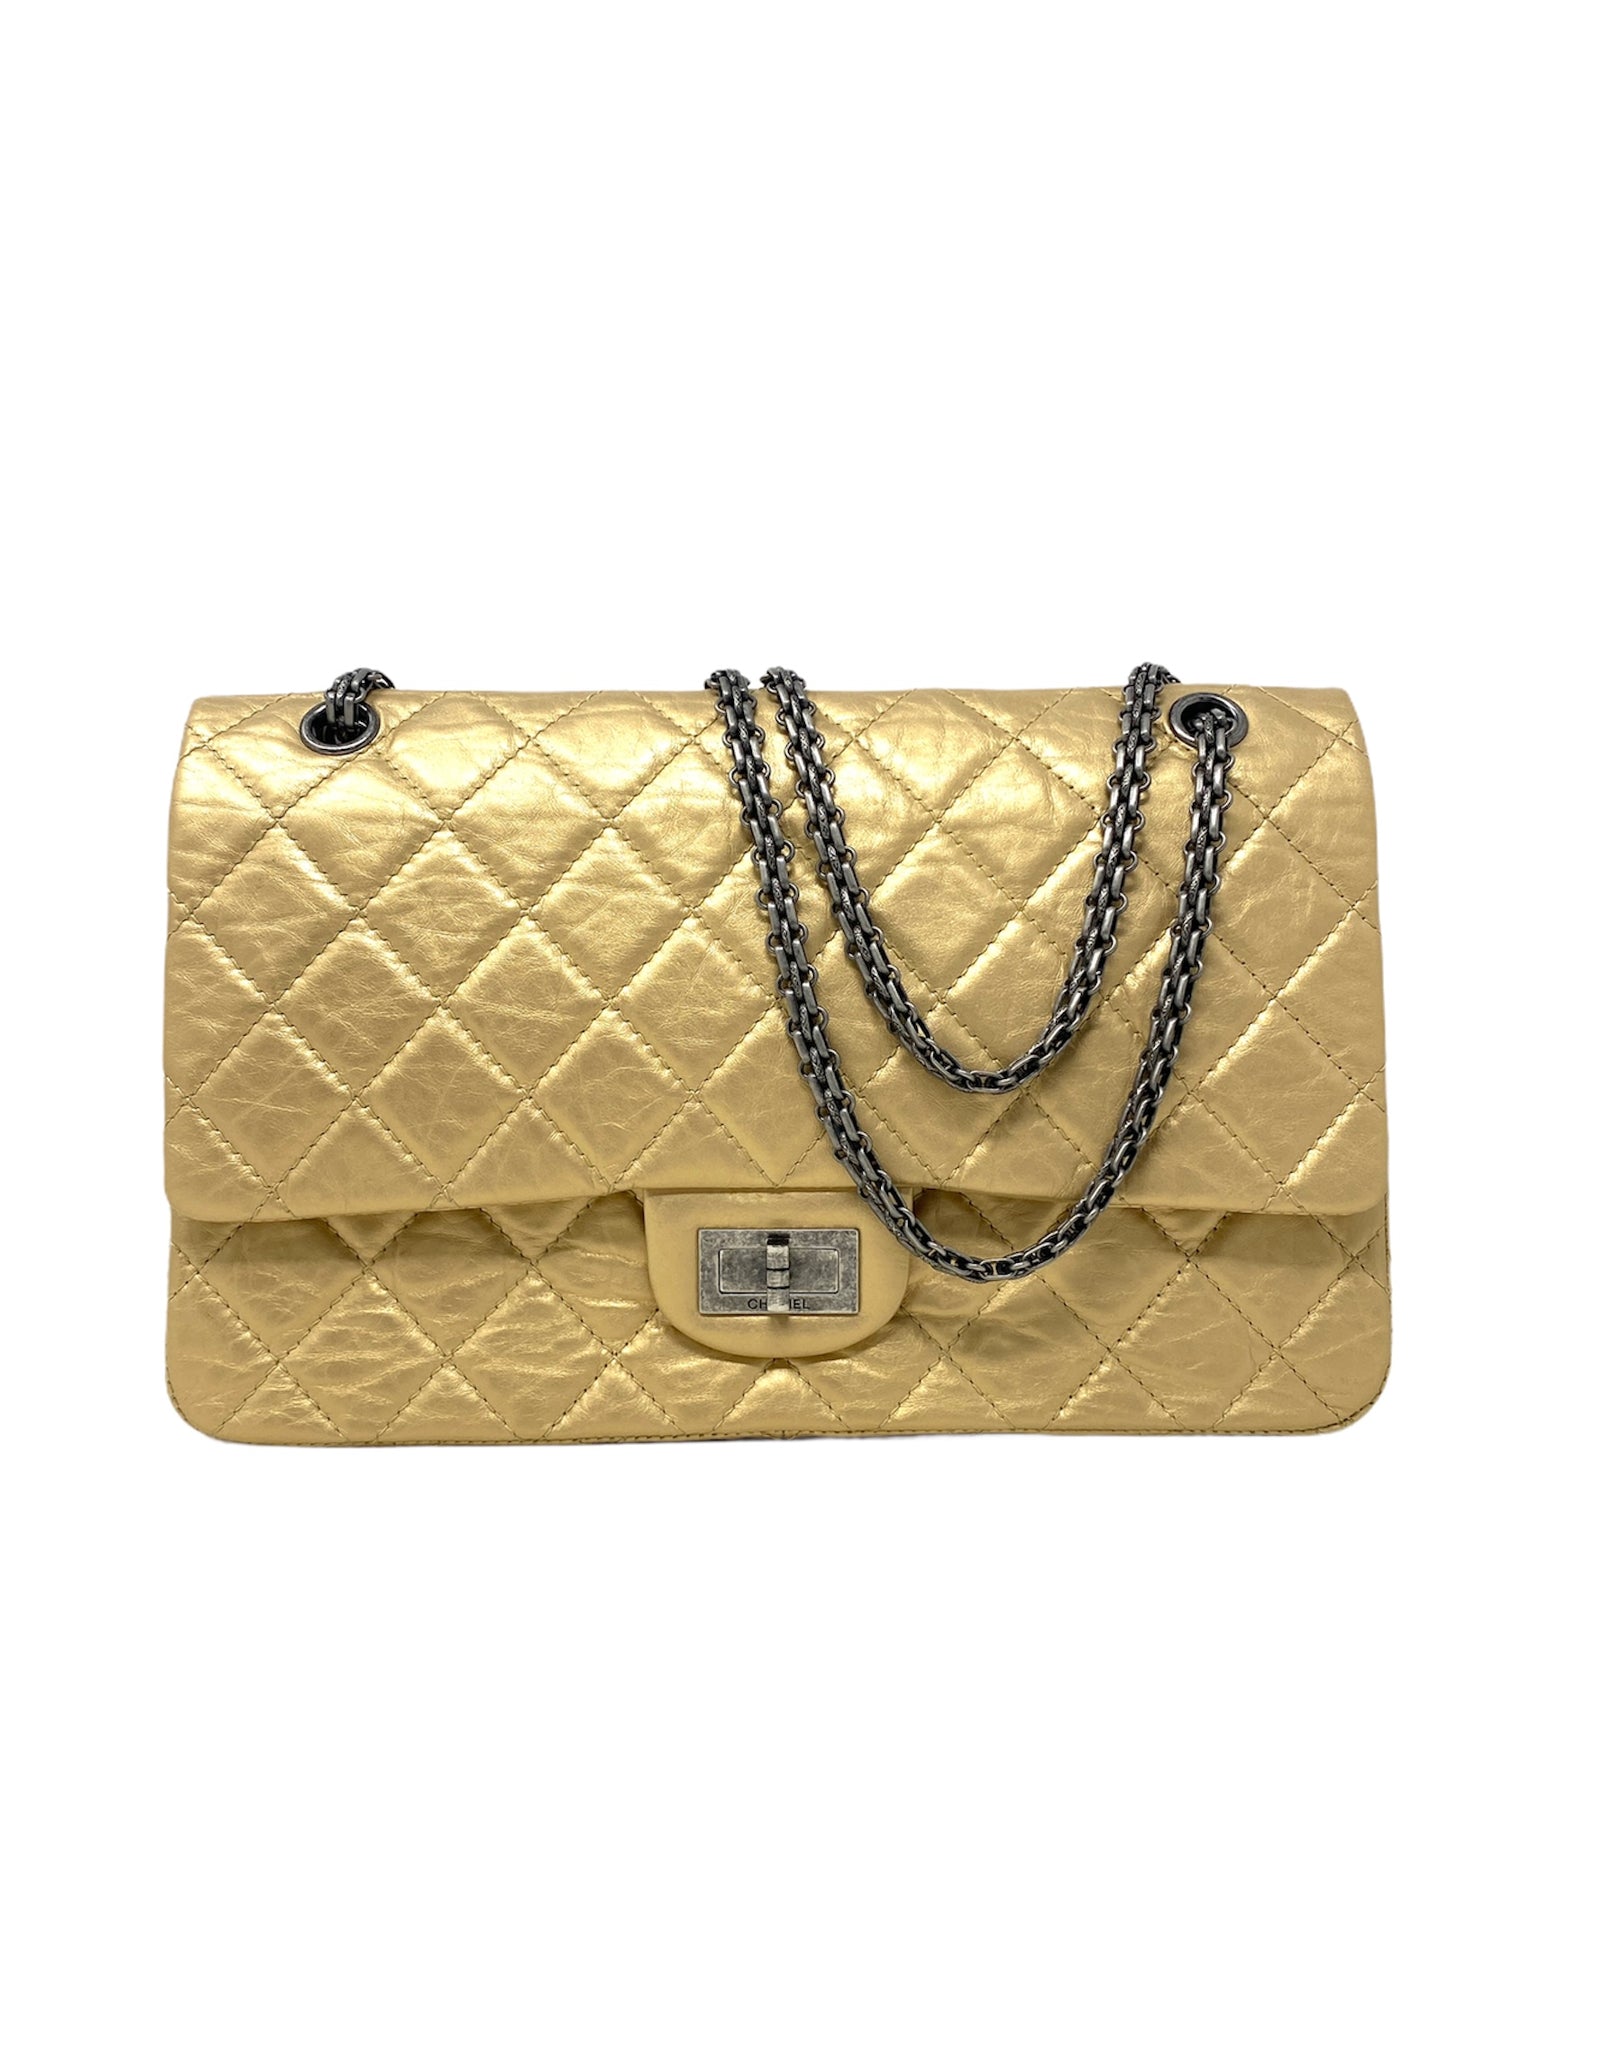 CHANEL, Bags, Authentic Special Edition Chanel Reissue 255 Flap Bag